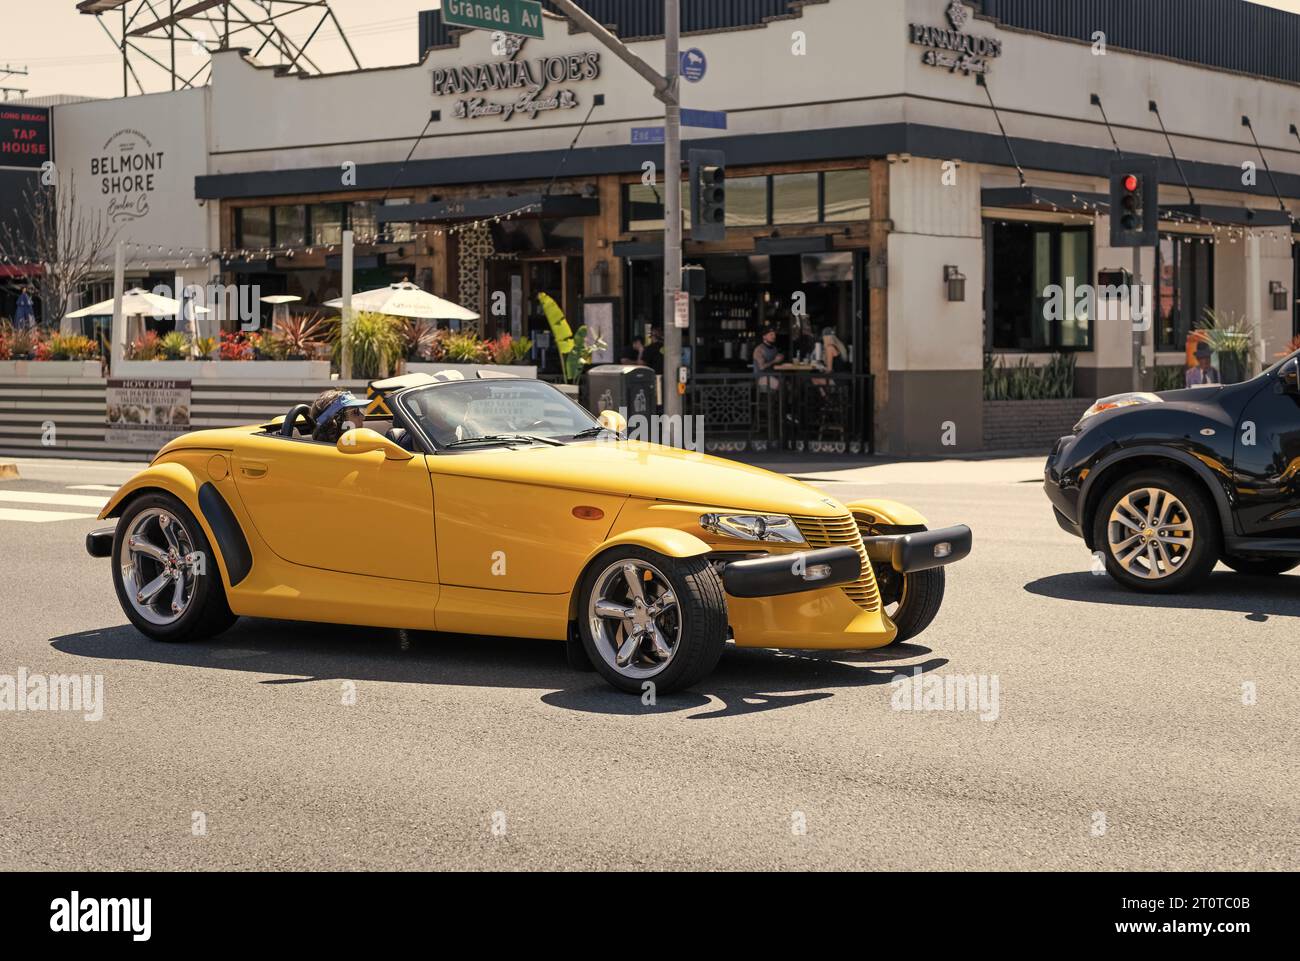 Long Beach, California USA - March 31, 2021: classic car of yellow Chrysler Plymouth Prowler on road Stock Photo